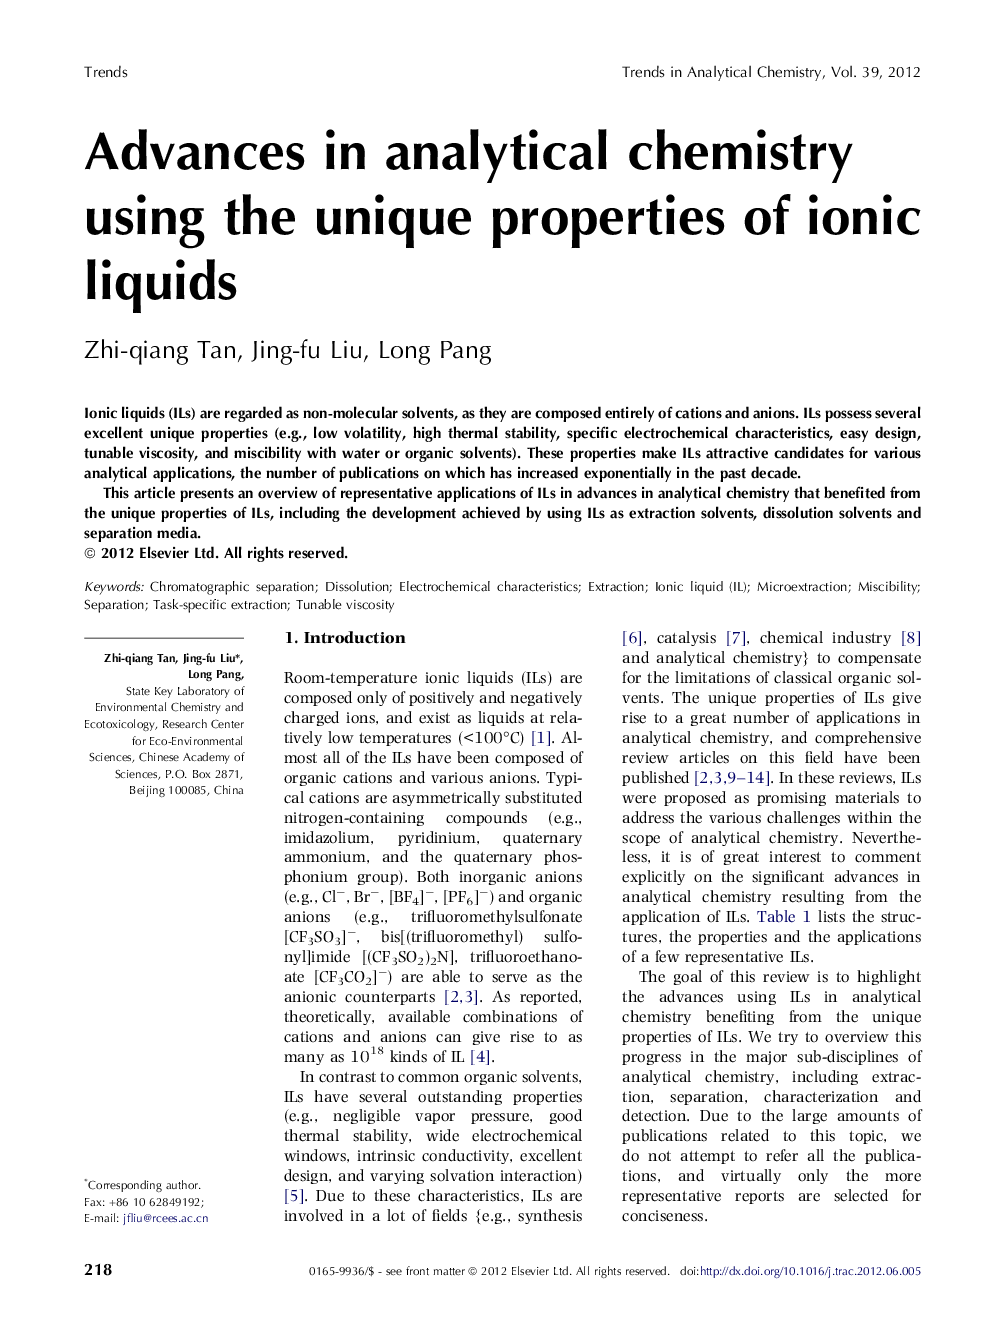 Advances in analytical chemistry using the unique properties of ionic liquids